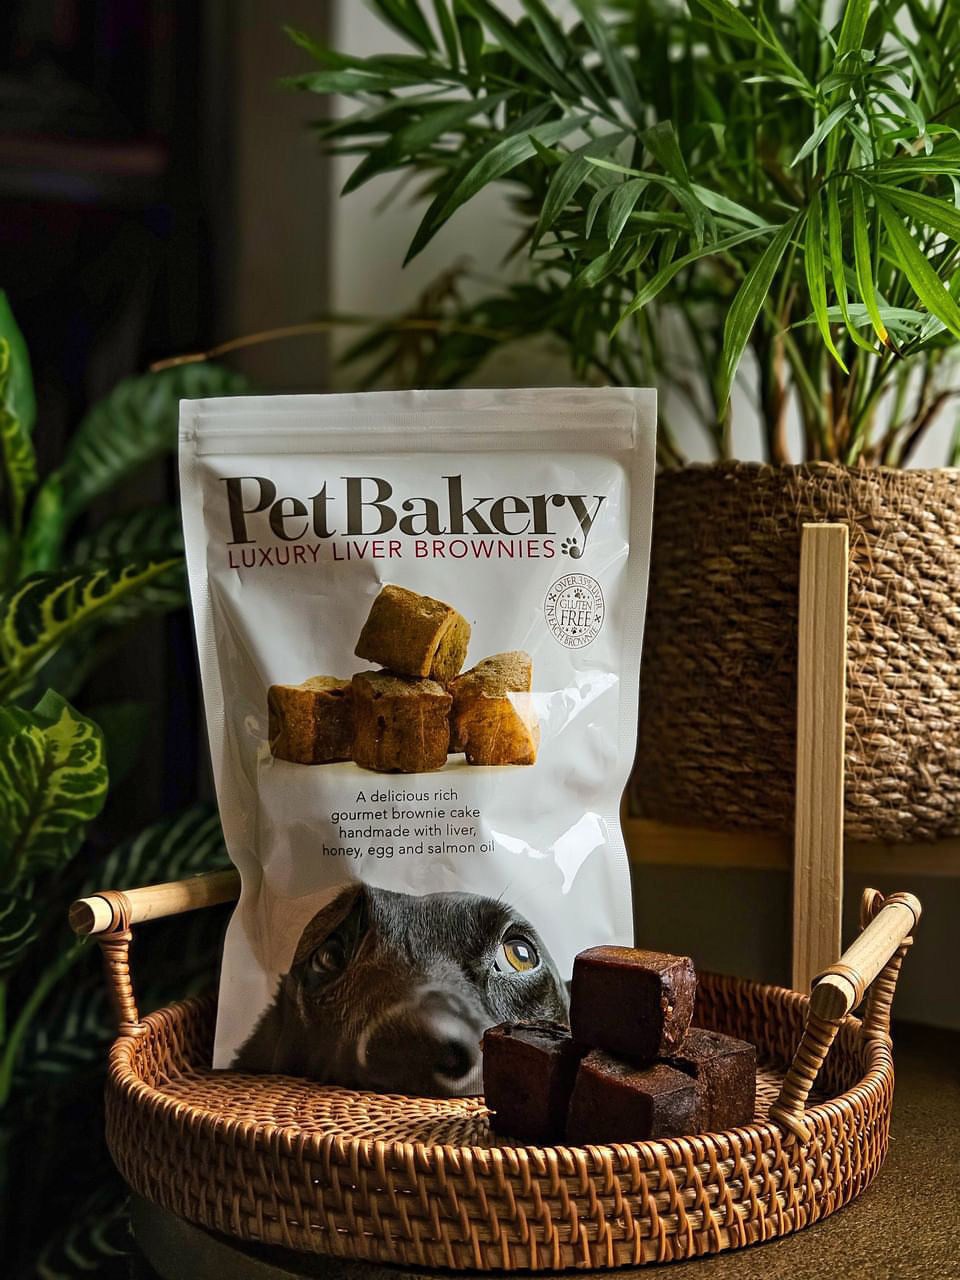 The Pet Bakery Luxury Liver Brownies